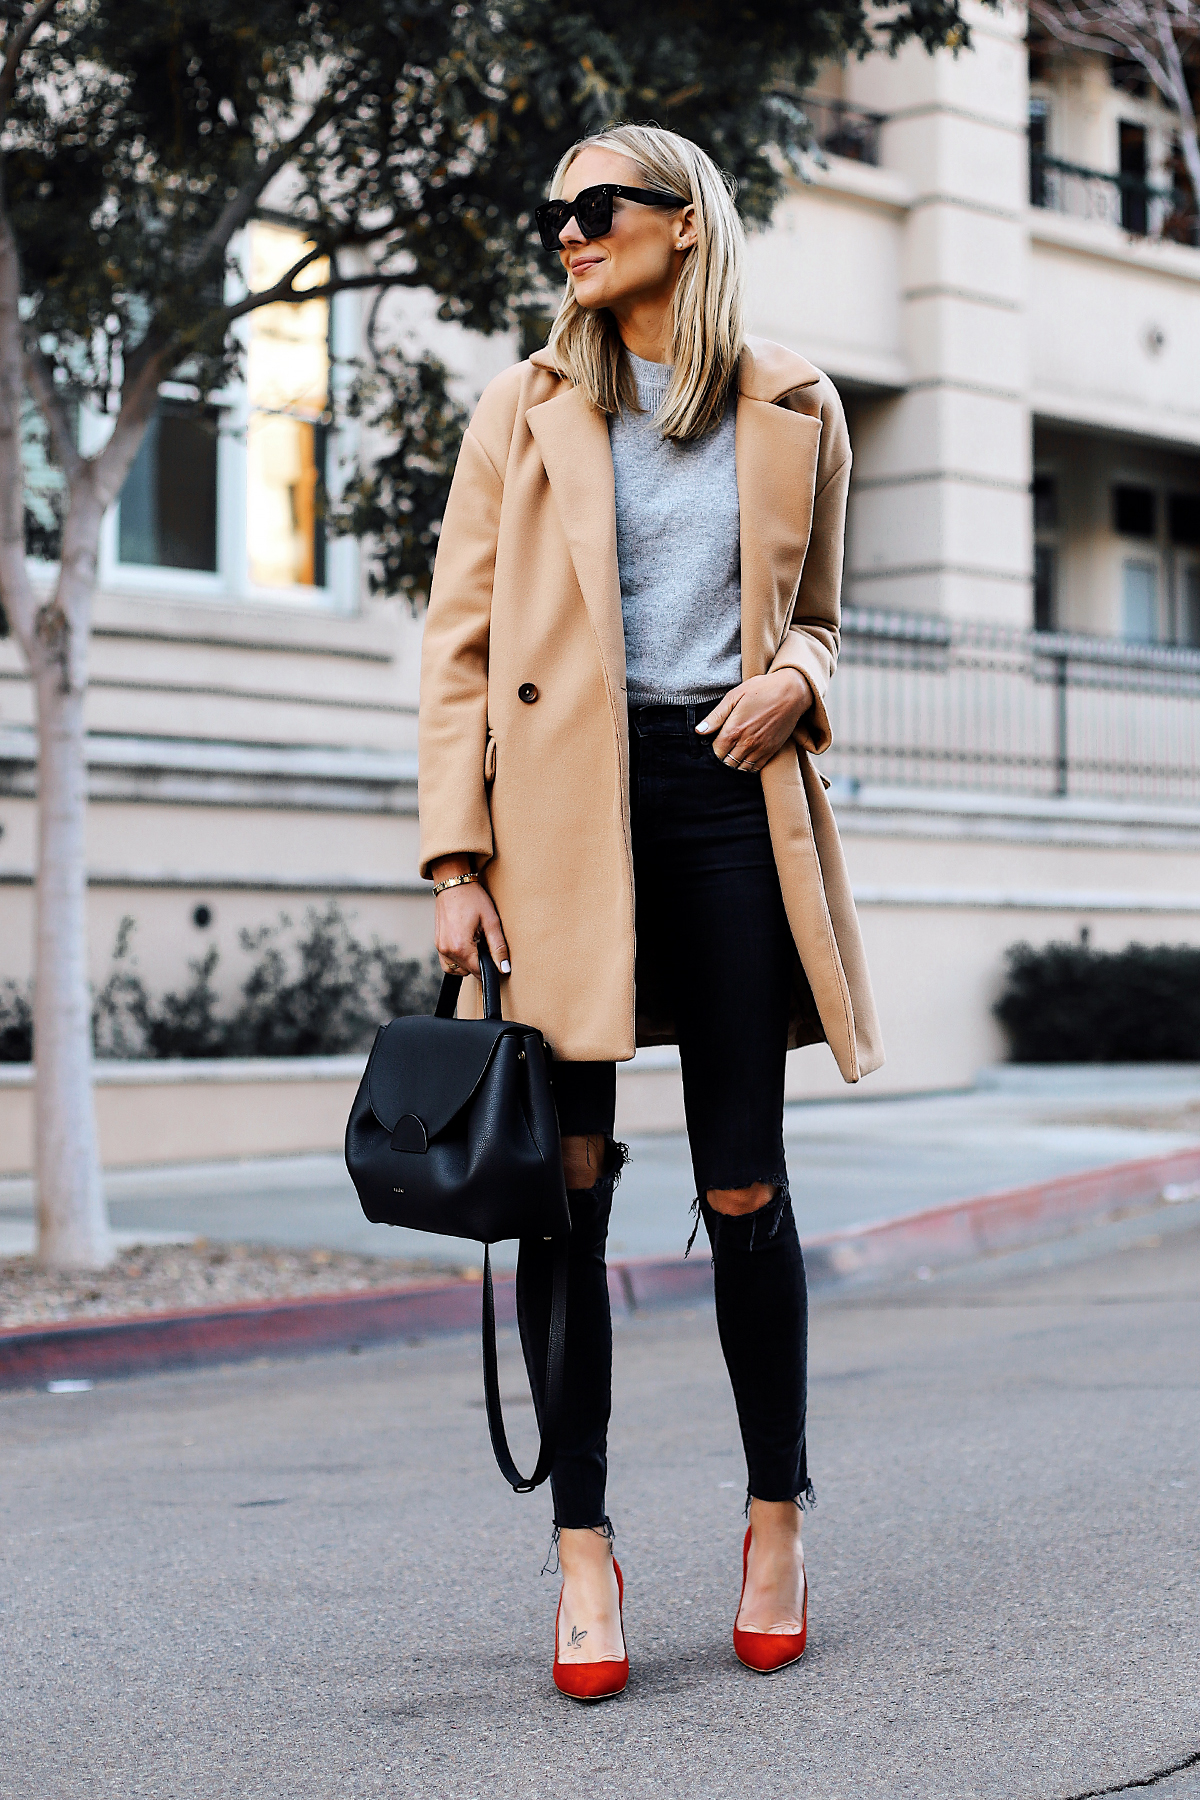 Blonde Woman Wearing Camel Coat Grey Sweater Black Ripped Skinny Jeans Red Pumps Outfit Black Satchel Handbag Fashion Jackson San Diego Fashion Blogger Street Style